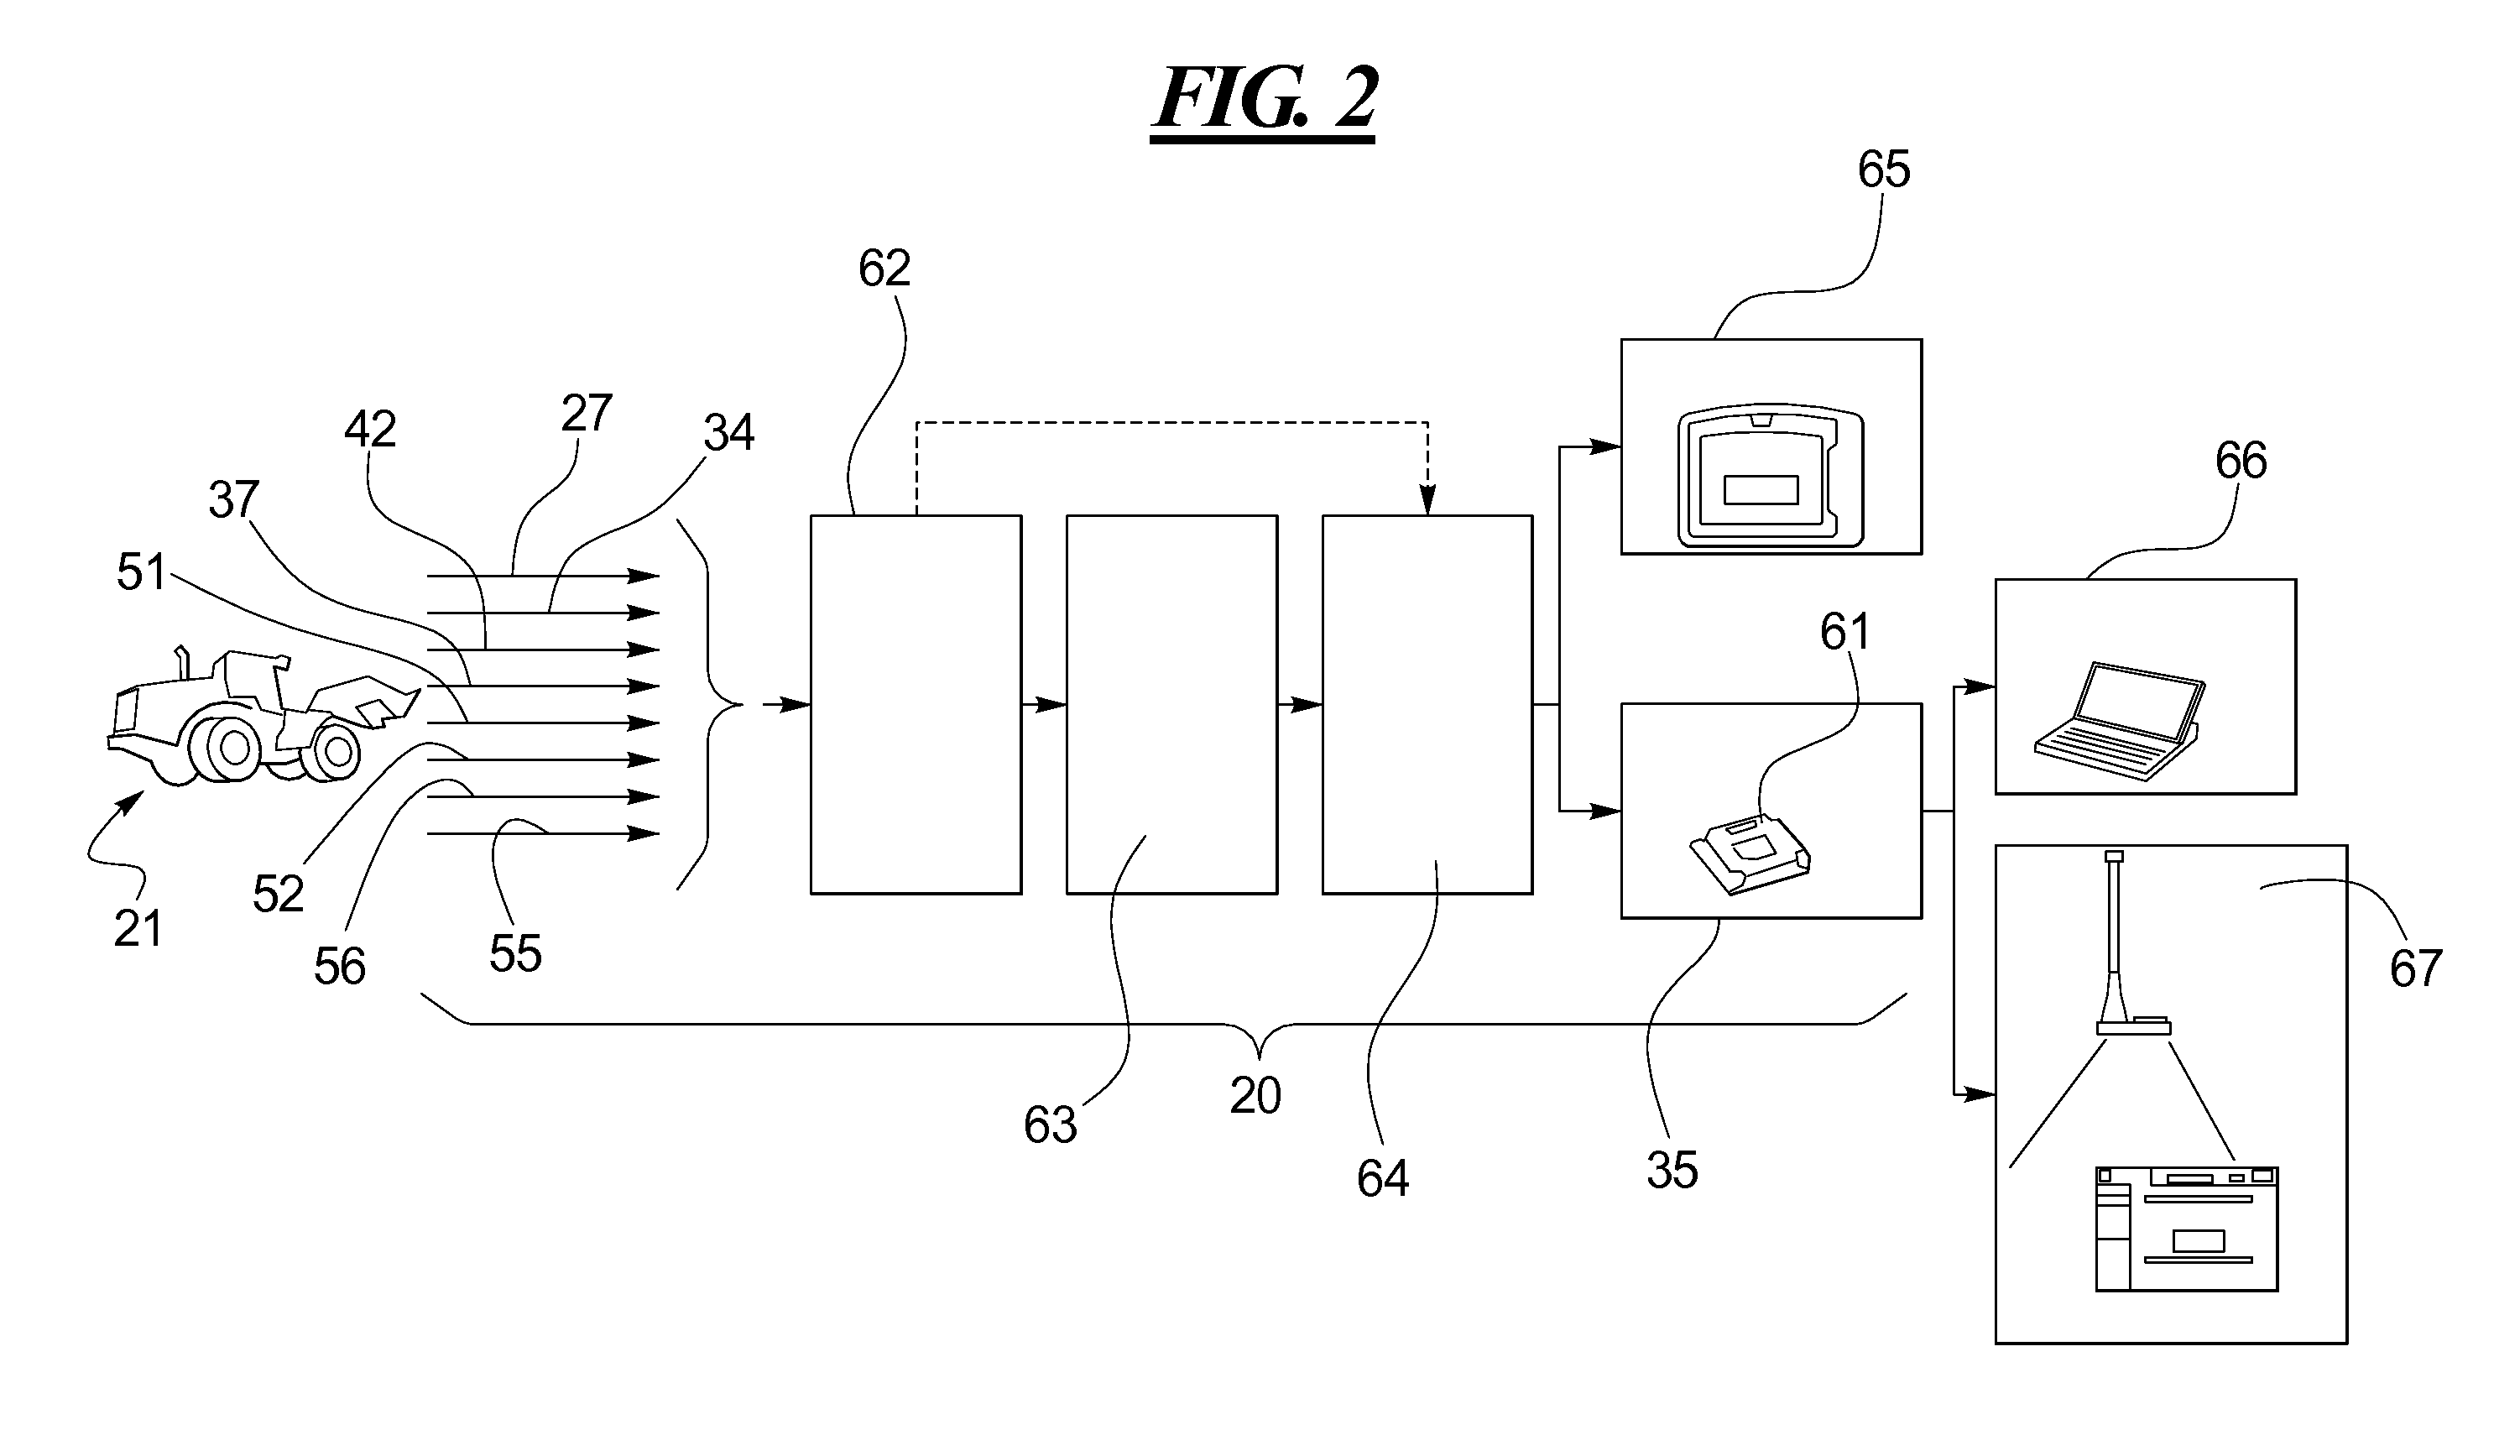 Equipment performance monitoring system and method